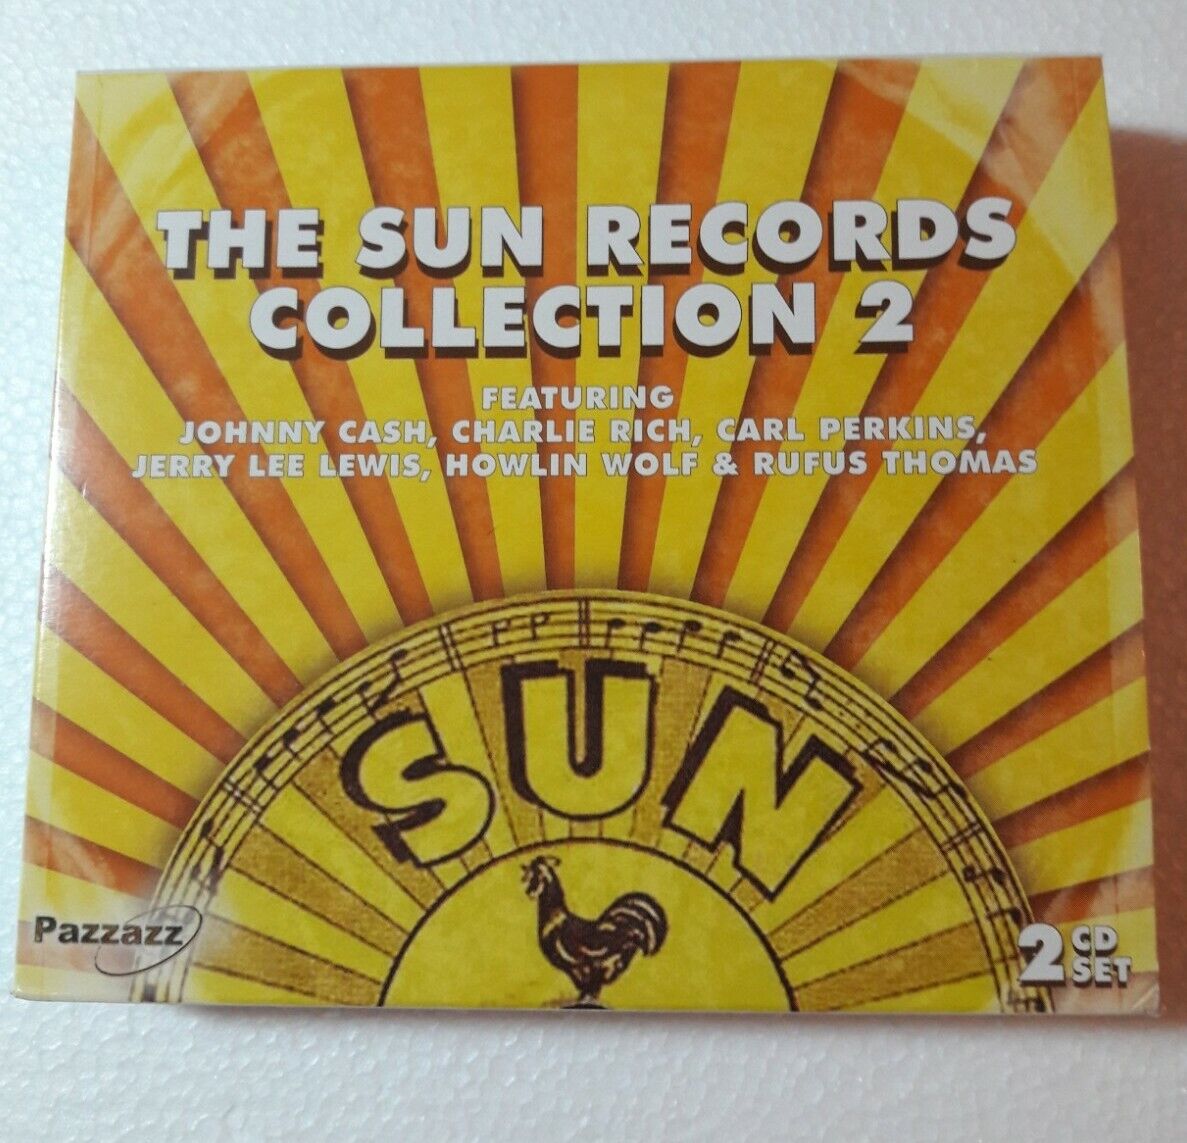 Vintage SUN RECORDS 2 CD Set Country Music Classics Johnny Cash Charlie Rich